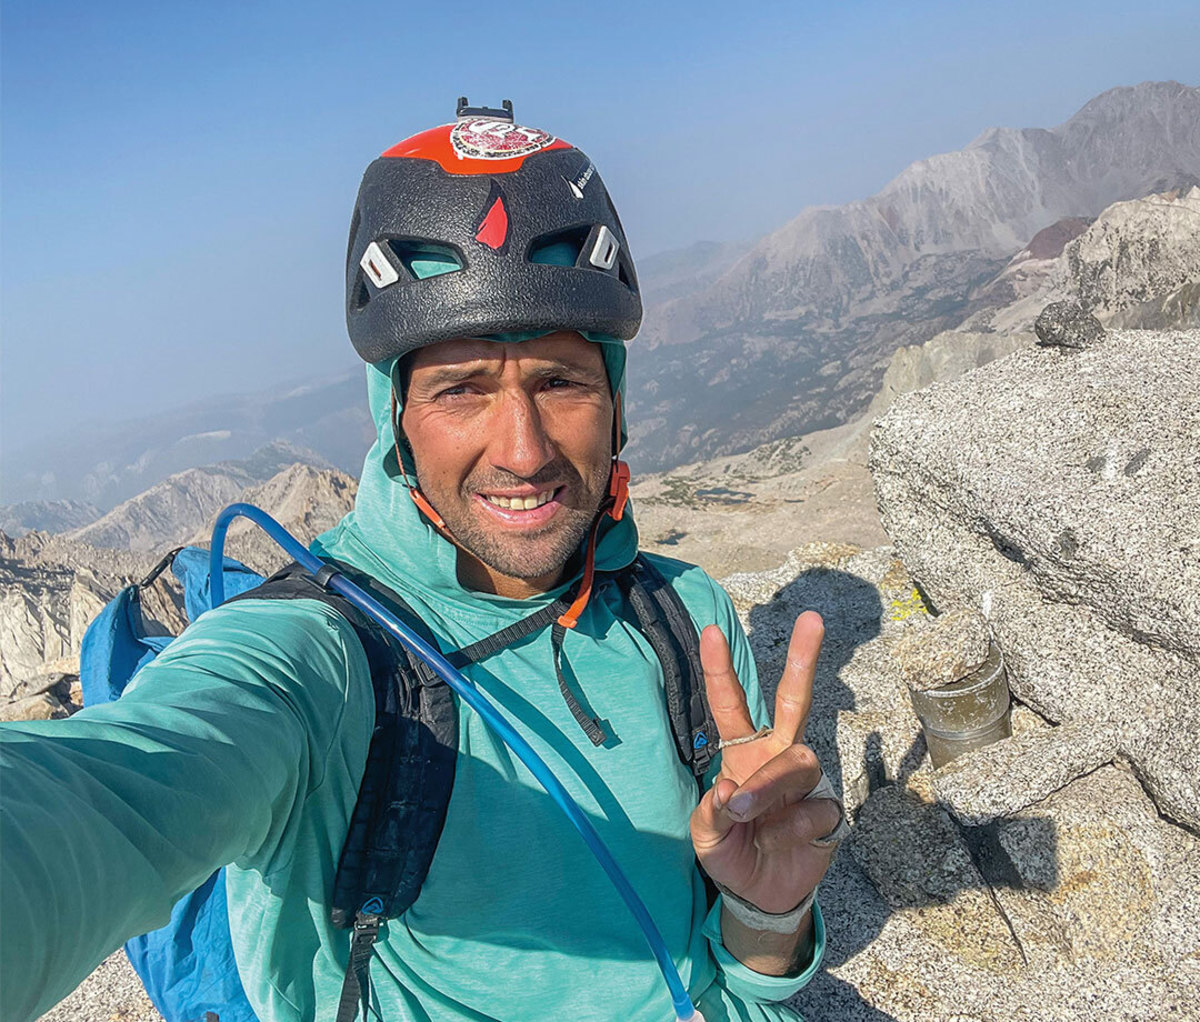 Climber in blue jacket and helmet signing peace with hands